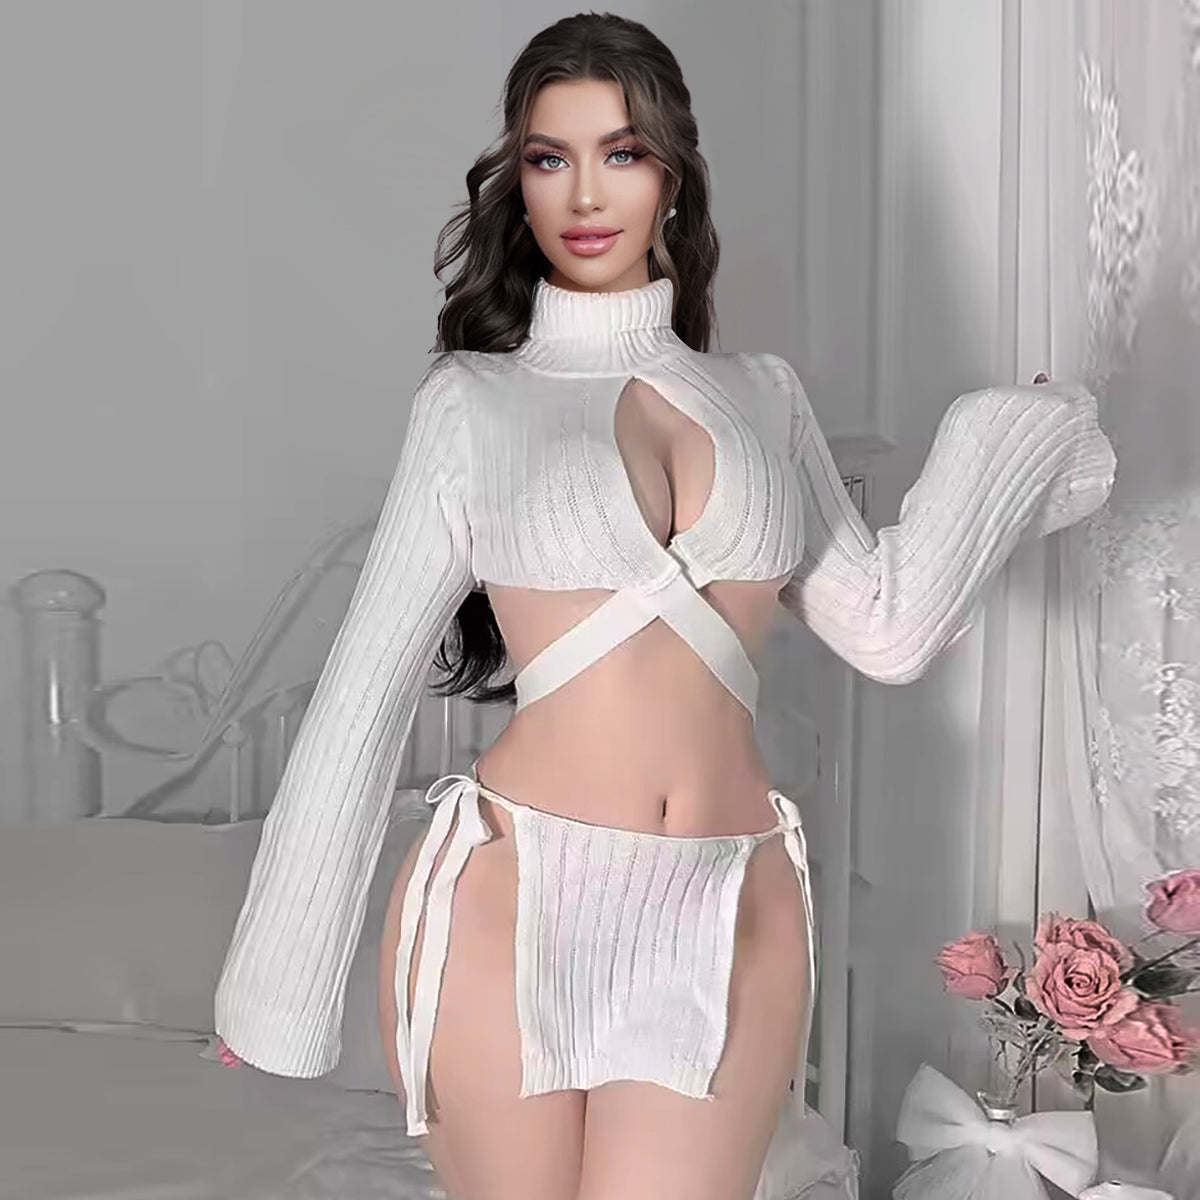 https://yomorio.com/cdn/shop/files/sexy-animal-outfit-white-fox-cosplay-outfit-two-piece-rib-knit-skirt-set-anime-lingerie-set_1.jpg?v=1700647193&width=1200